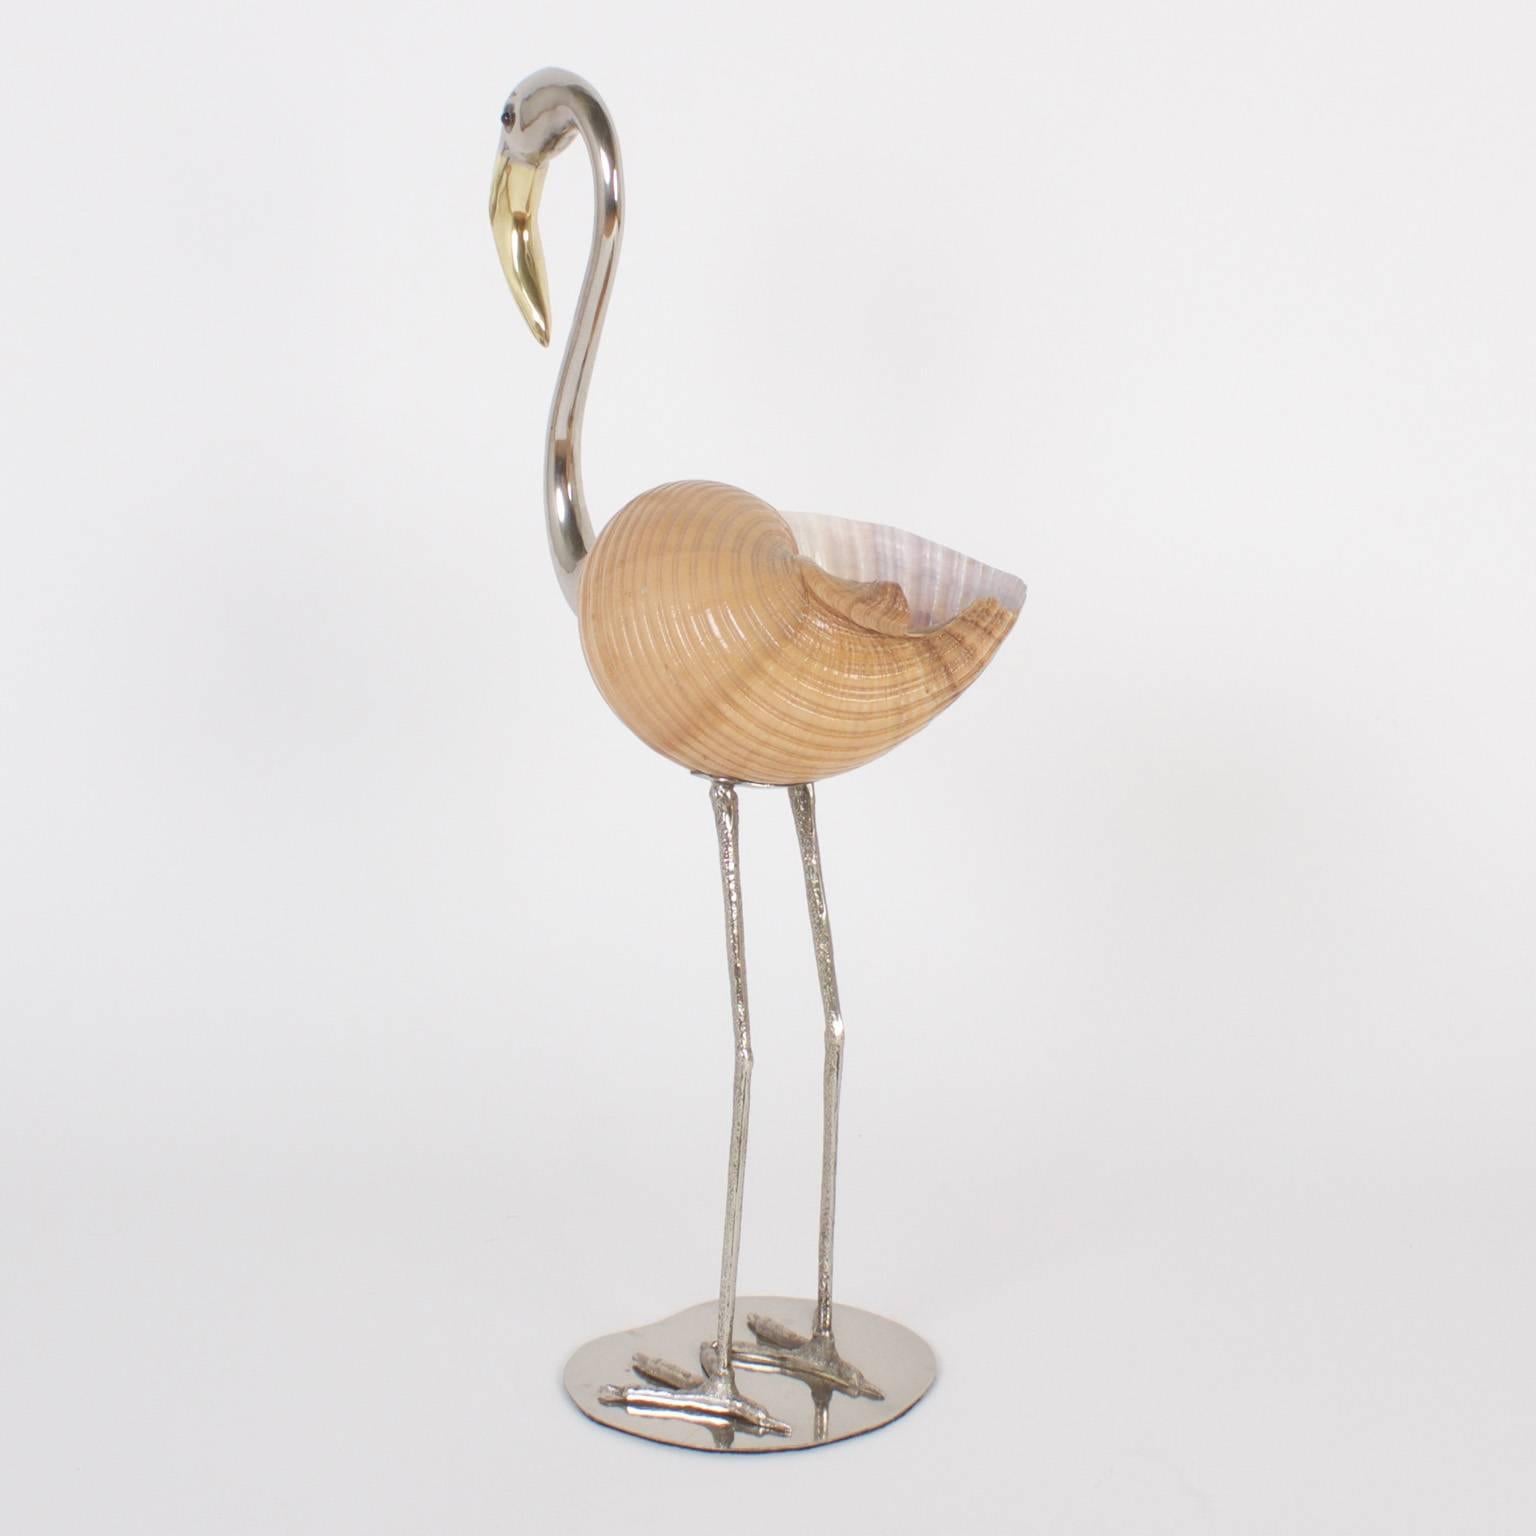 Whimsical, modern Flamingo sculpture ingeniously crafted with a Tonne shell and silver plated brass. Tall, lanky and a touch of elegance. Signed Binazzi under the neck.
 